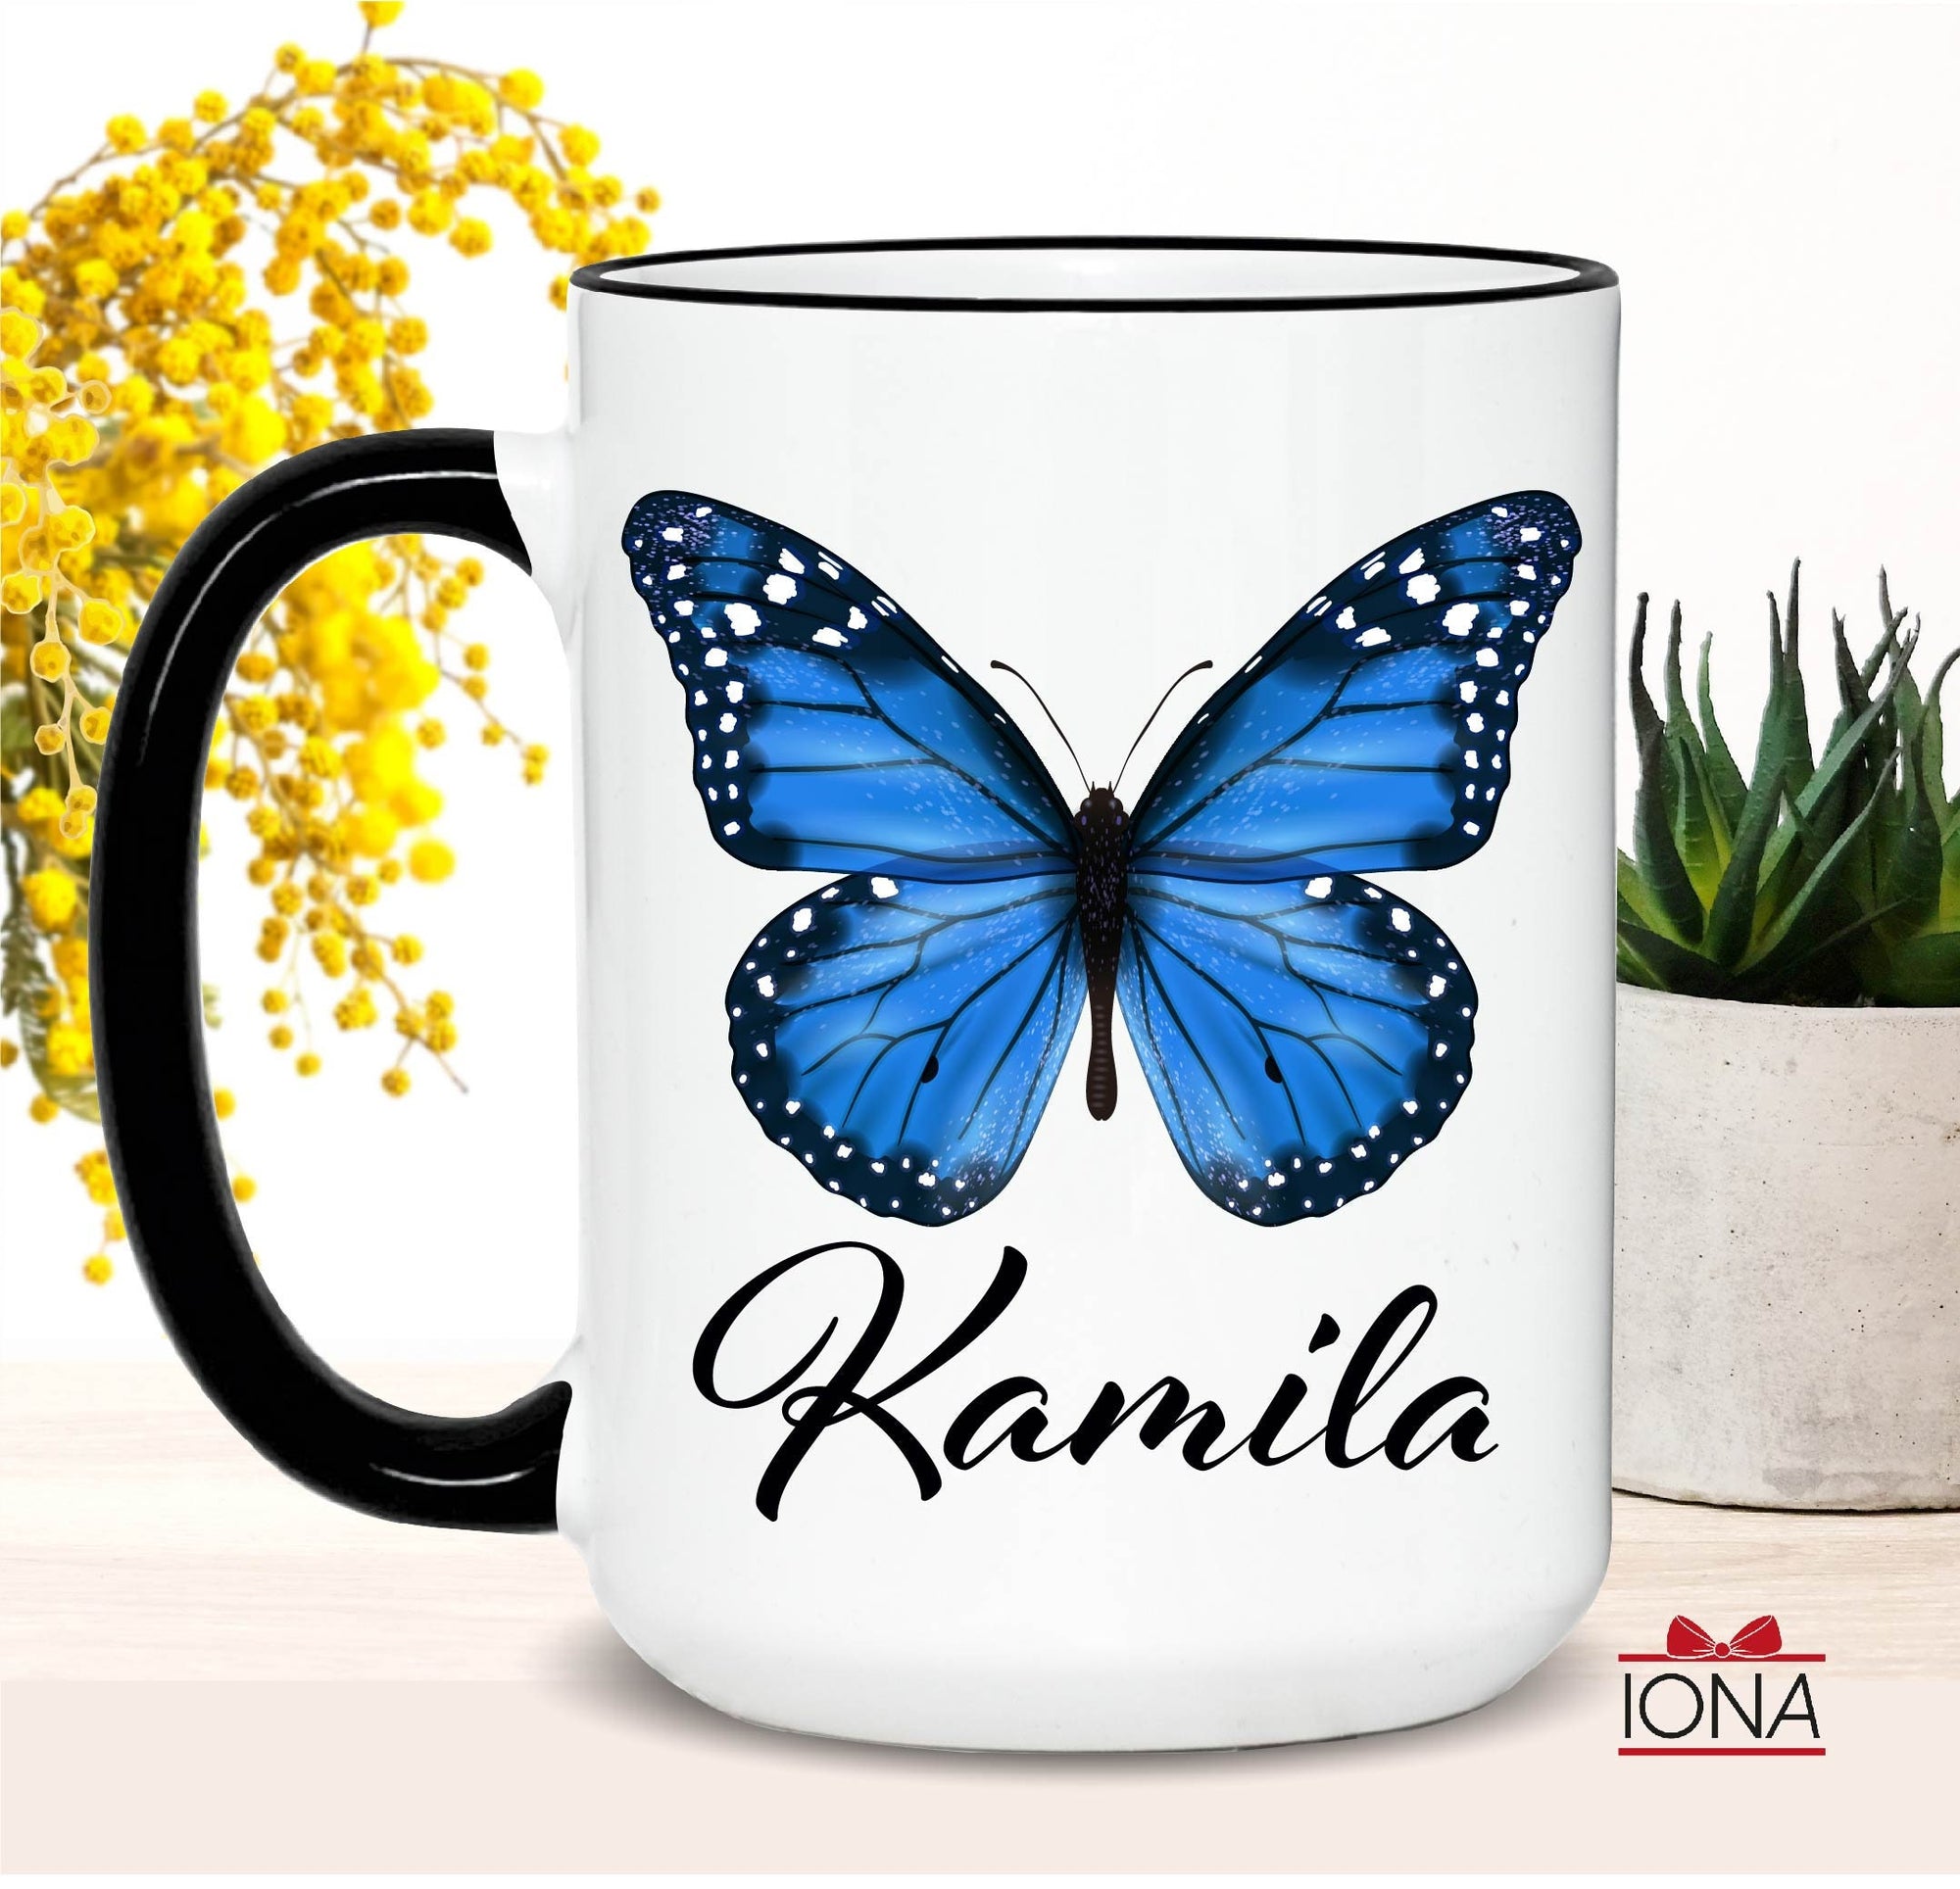 Butterfly Mug Blue, Butterfly Coffee Mug, Butterfly Gifts for Women Unique, Personalized Butterfly Coffee Cup With Name, Butterflies Gift